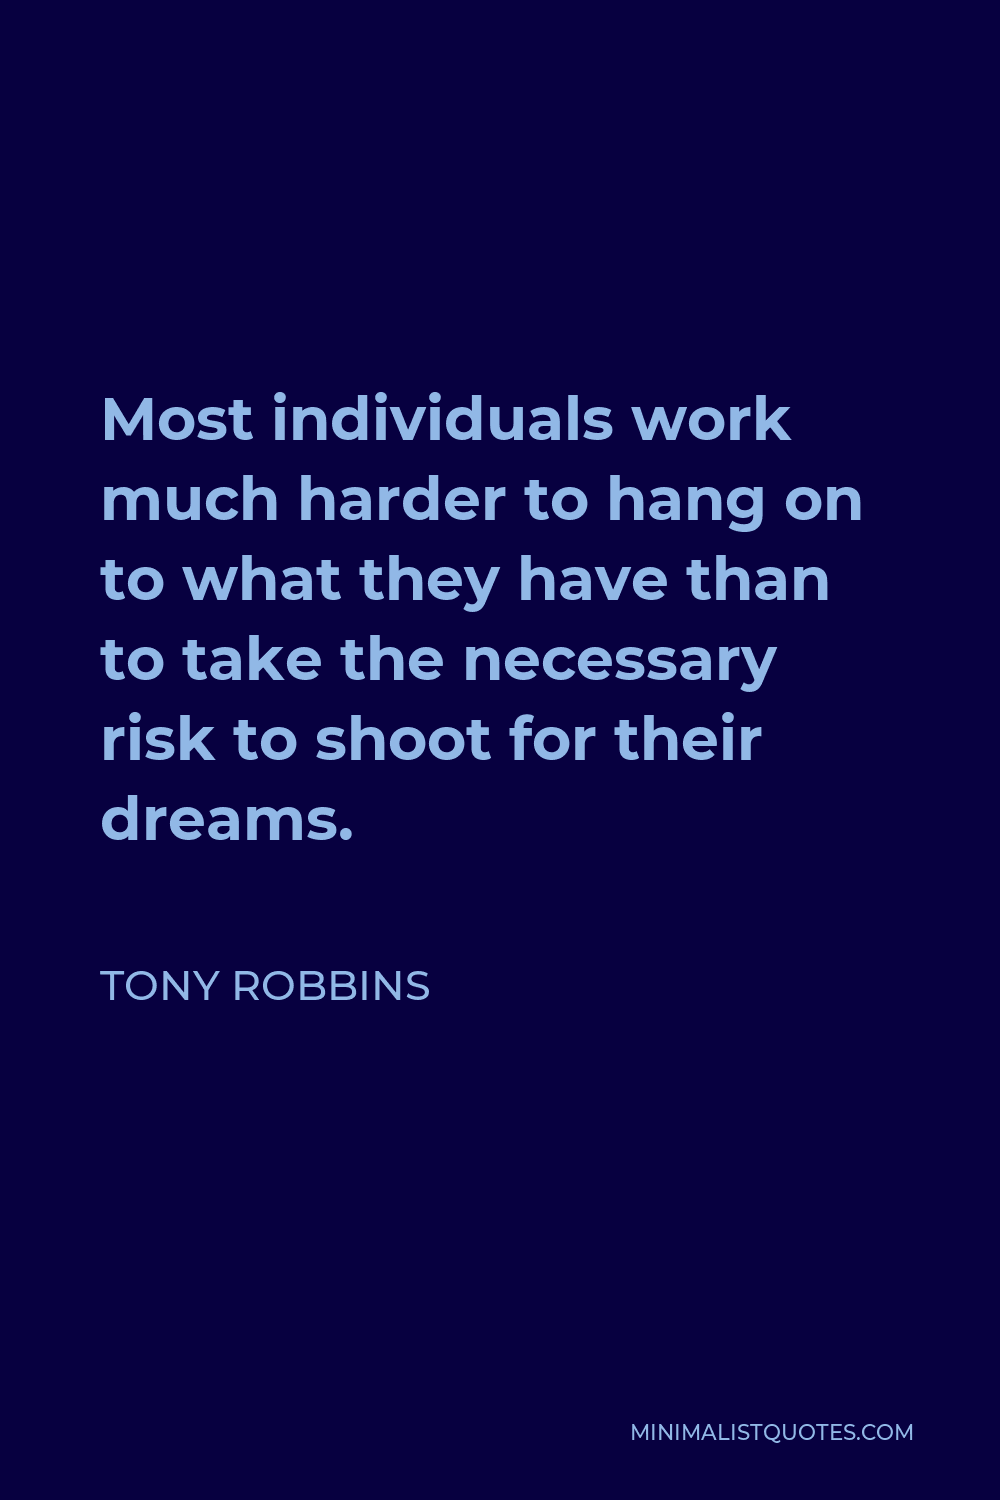 Tony Robbins Quote - Most individuals work much harder to hang on to what they have than to take the necessary risk to shoot for their dreams.